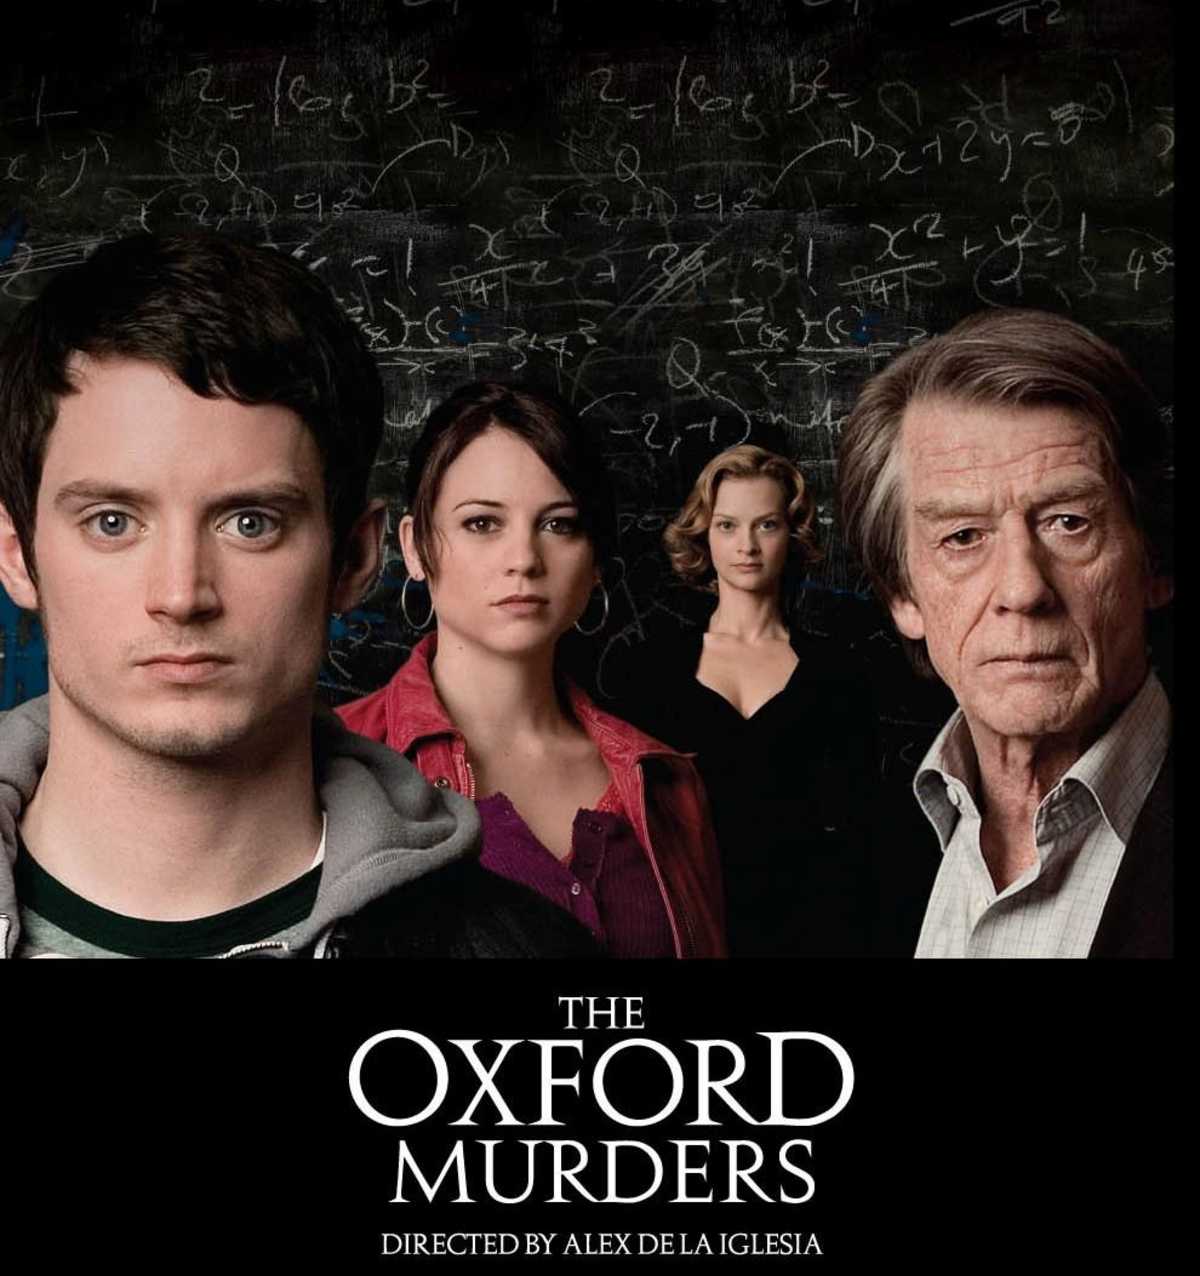 The Oxford murders